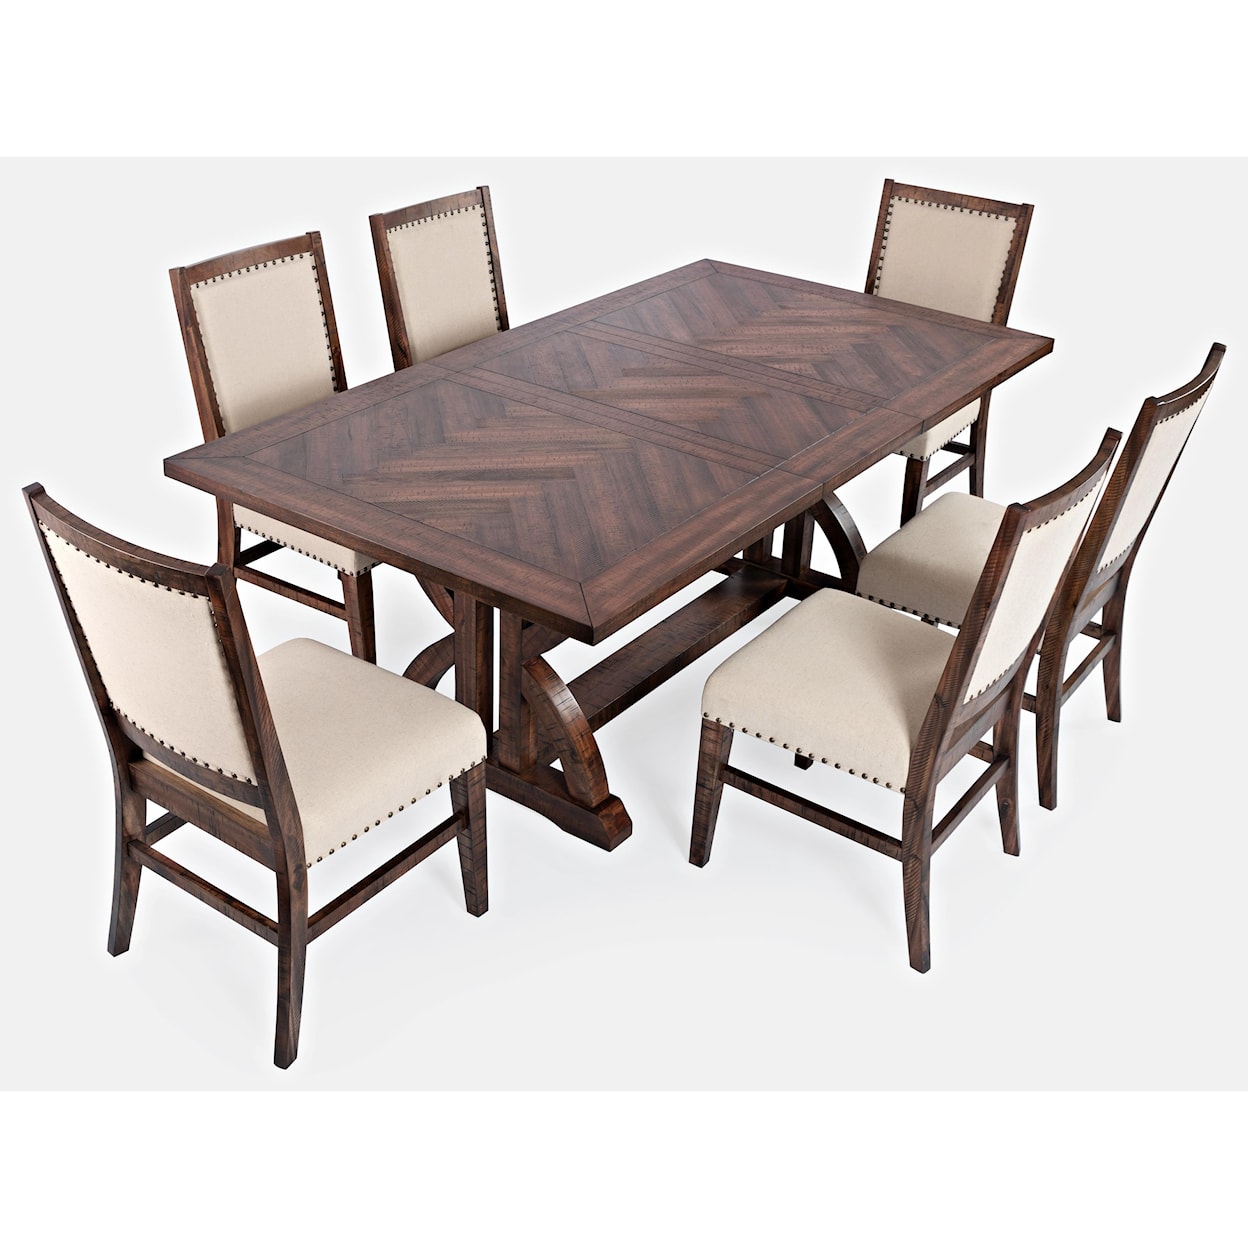 Jofran Fairview 7-Piece Dining Table and Chair Set